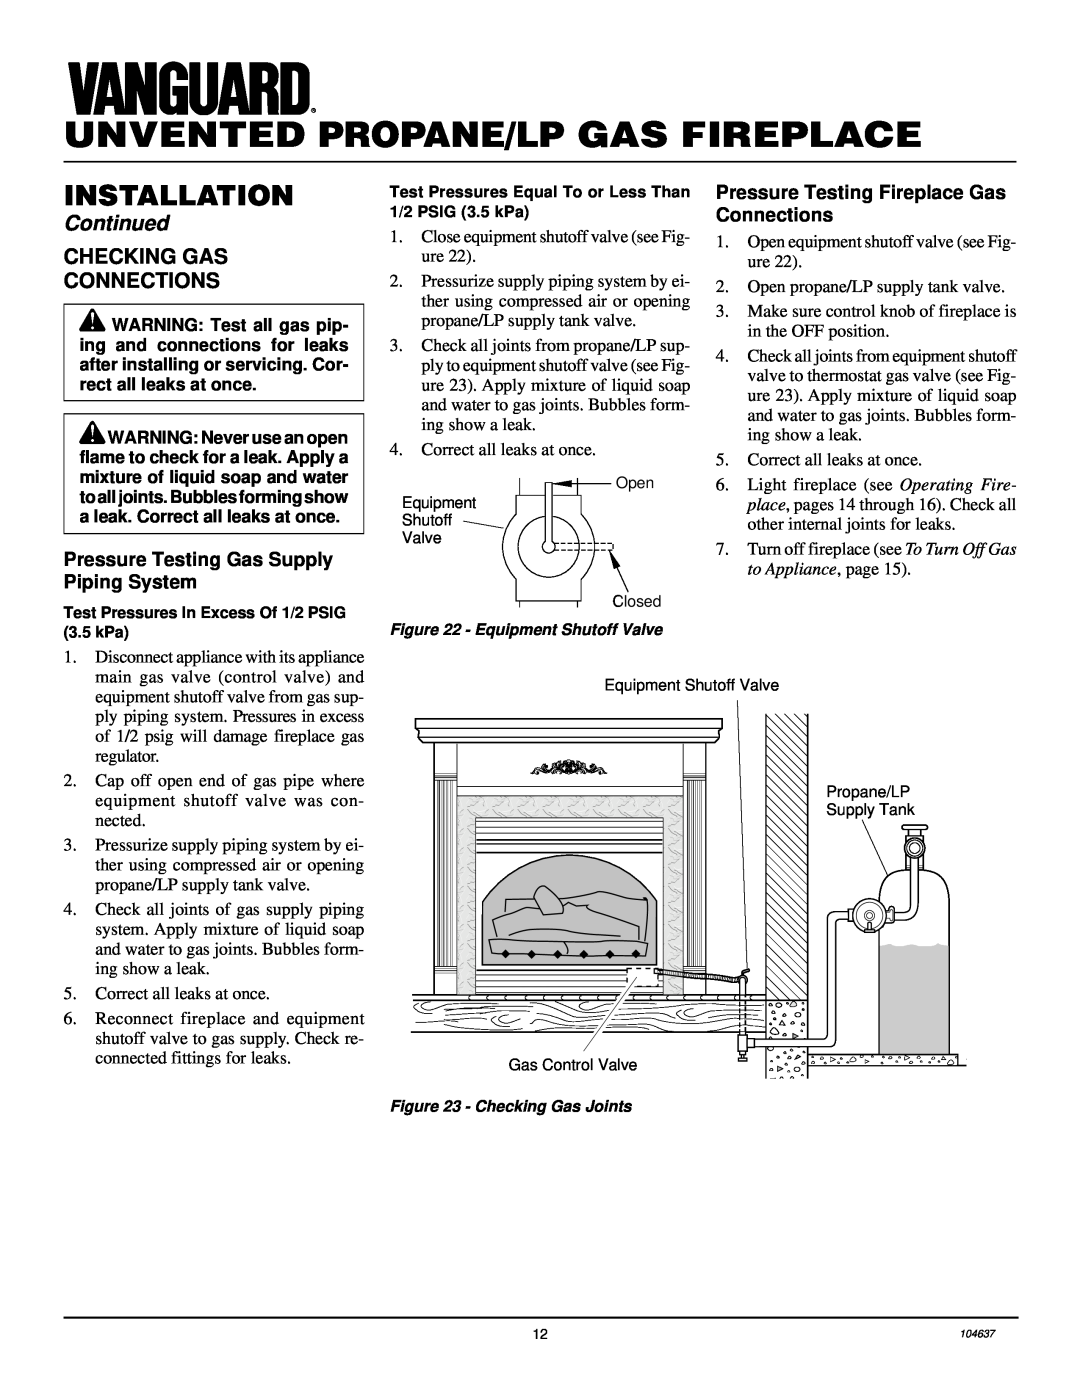 Desa VCGF30PR installation manual Checking Gas Connections, Unvented Propane/Lp Gas Fireplace, Installation, Continued 